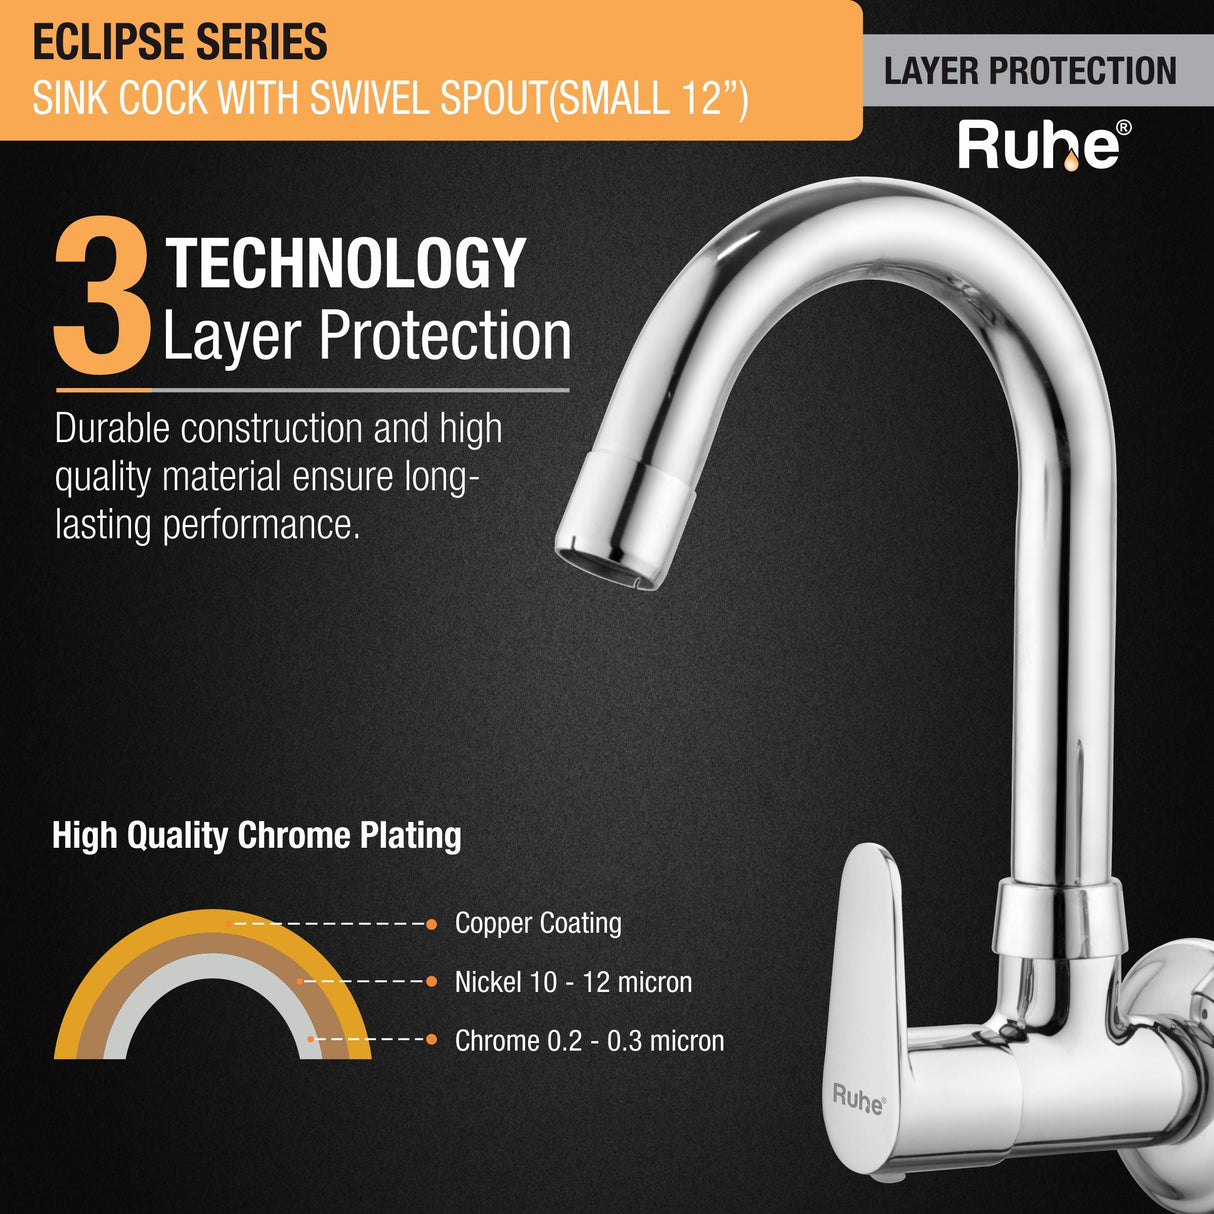 Eclipse Sink Tap With Small (12 inches) Round Swivel Spout Faucet 3 layer protection